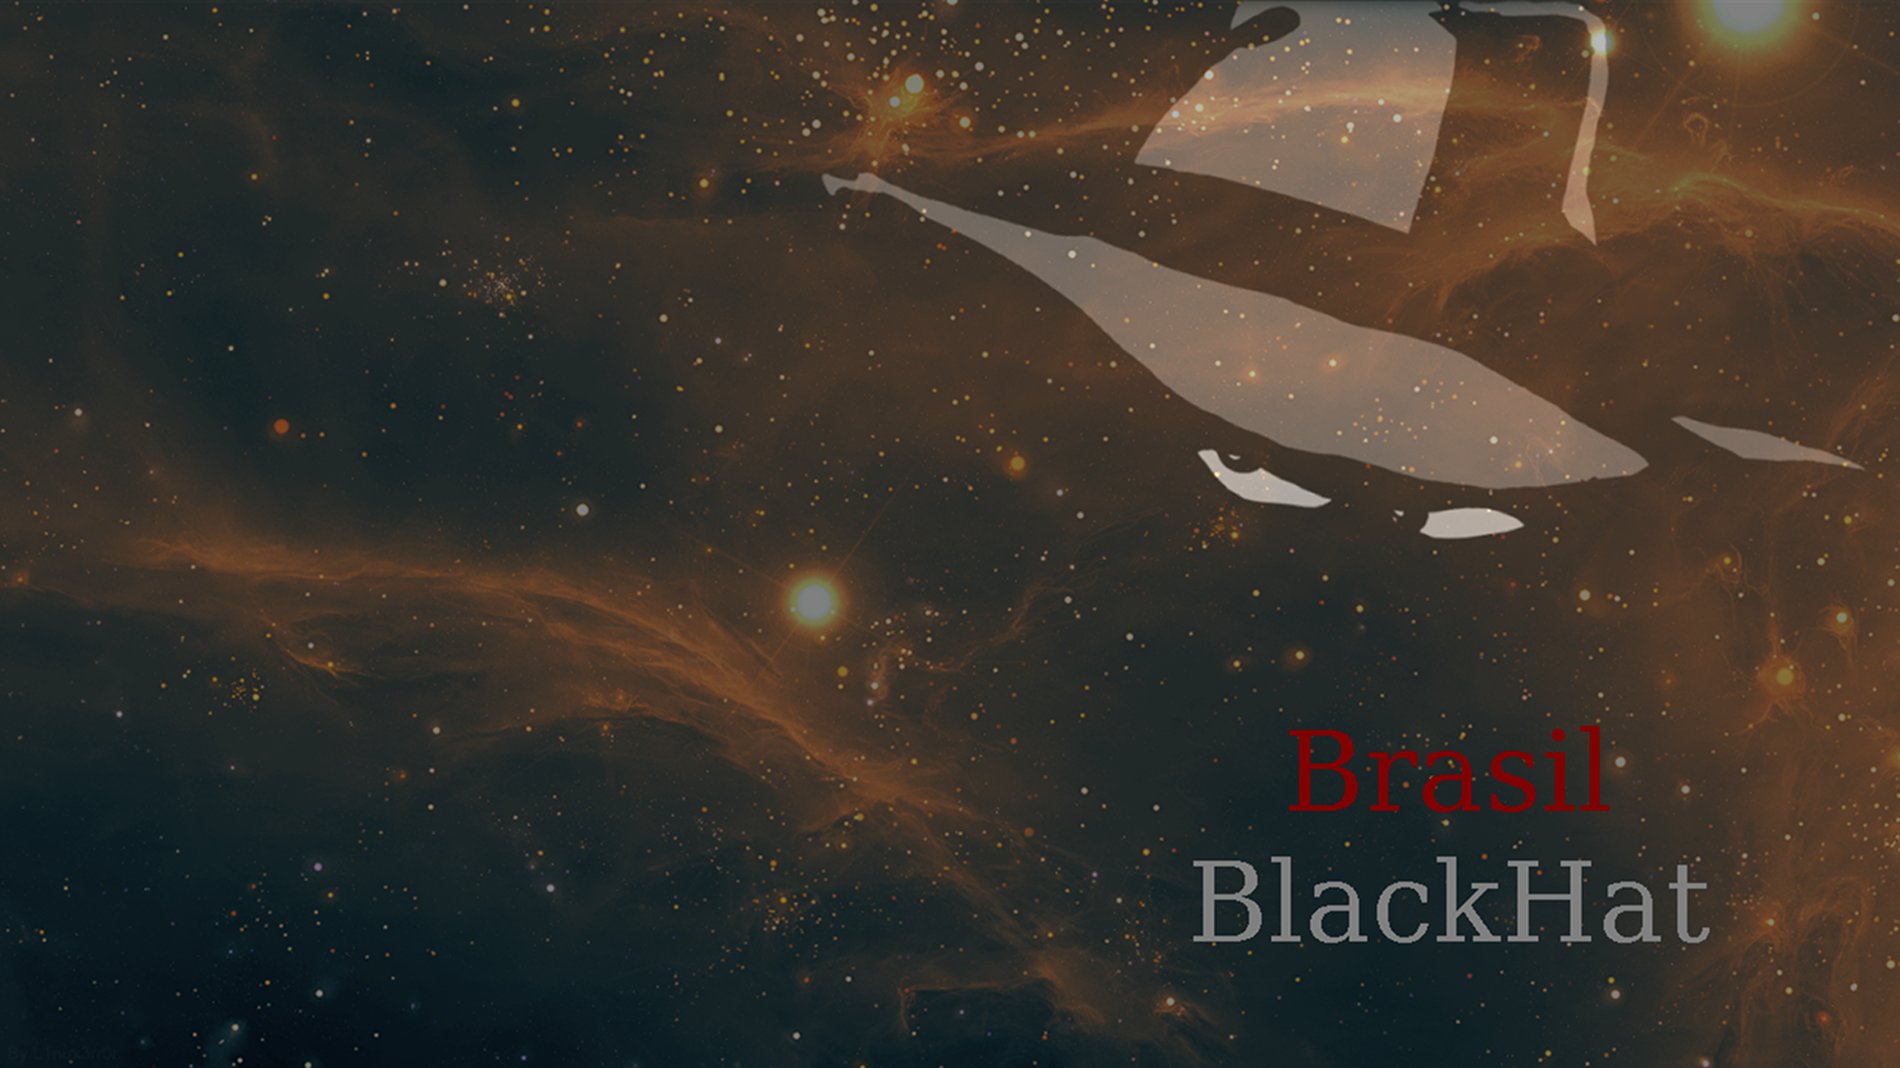 universe, Brasil, Blackhat, Hacking, Hack, Universe, Space, Star, Planets, Galaxy, Mistery, Misterious Wallpaper